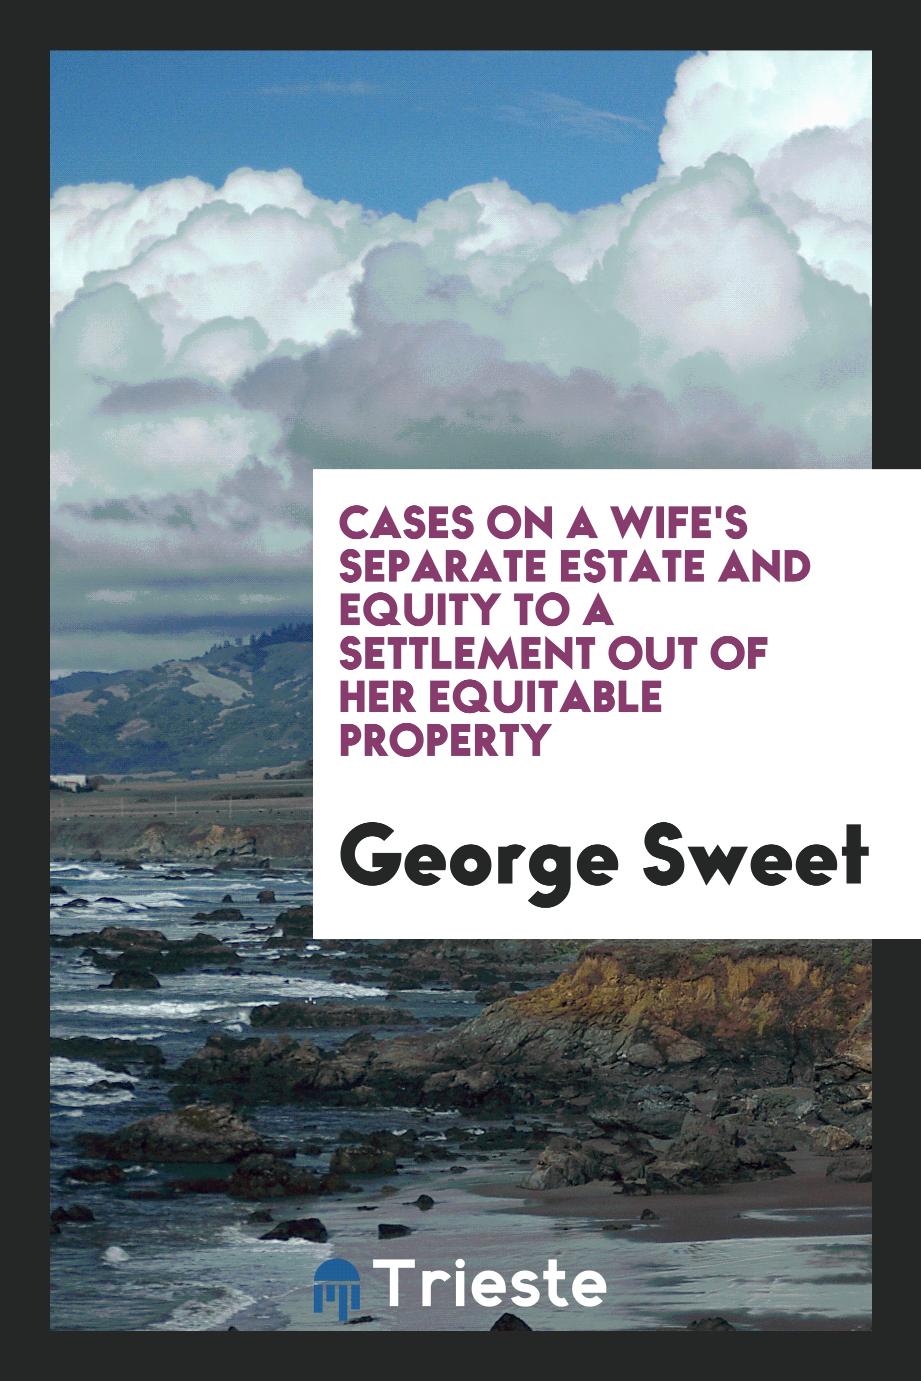 Cases on a Wife's Separate Estate and Equity to a Settlement Out of Her Equitable Property